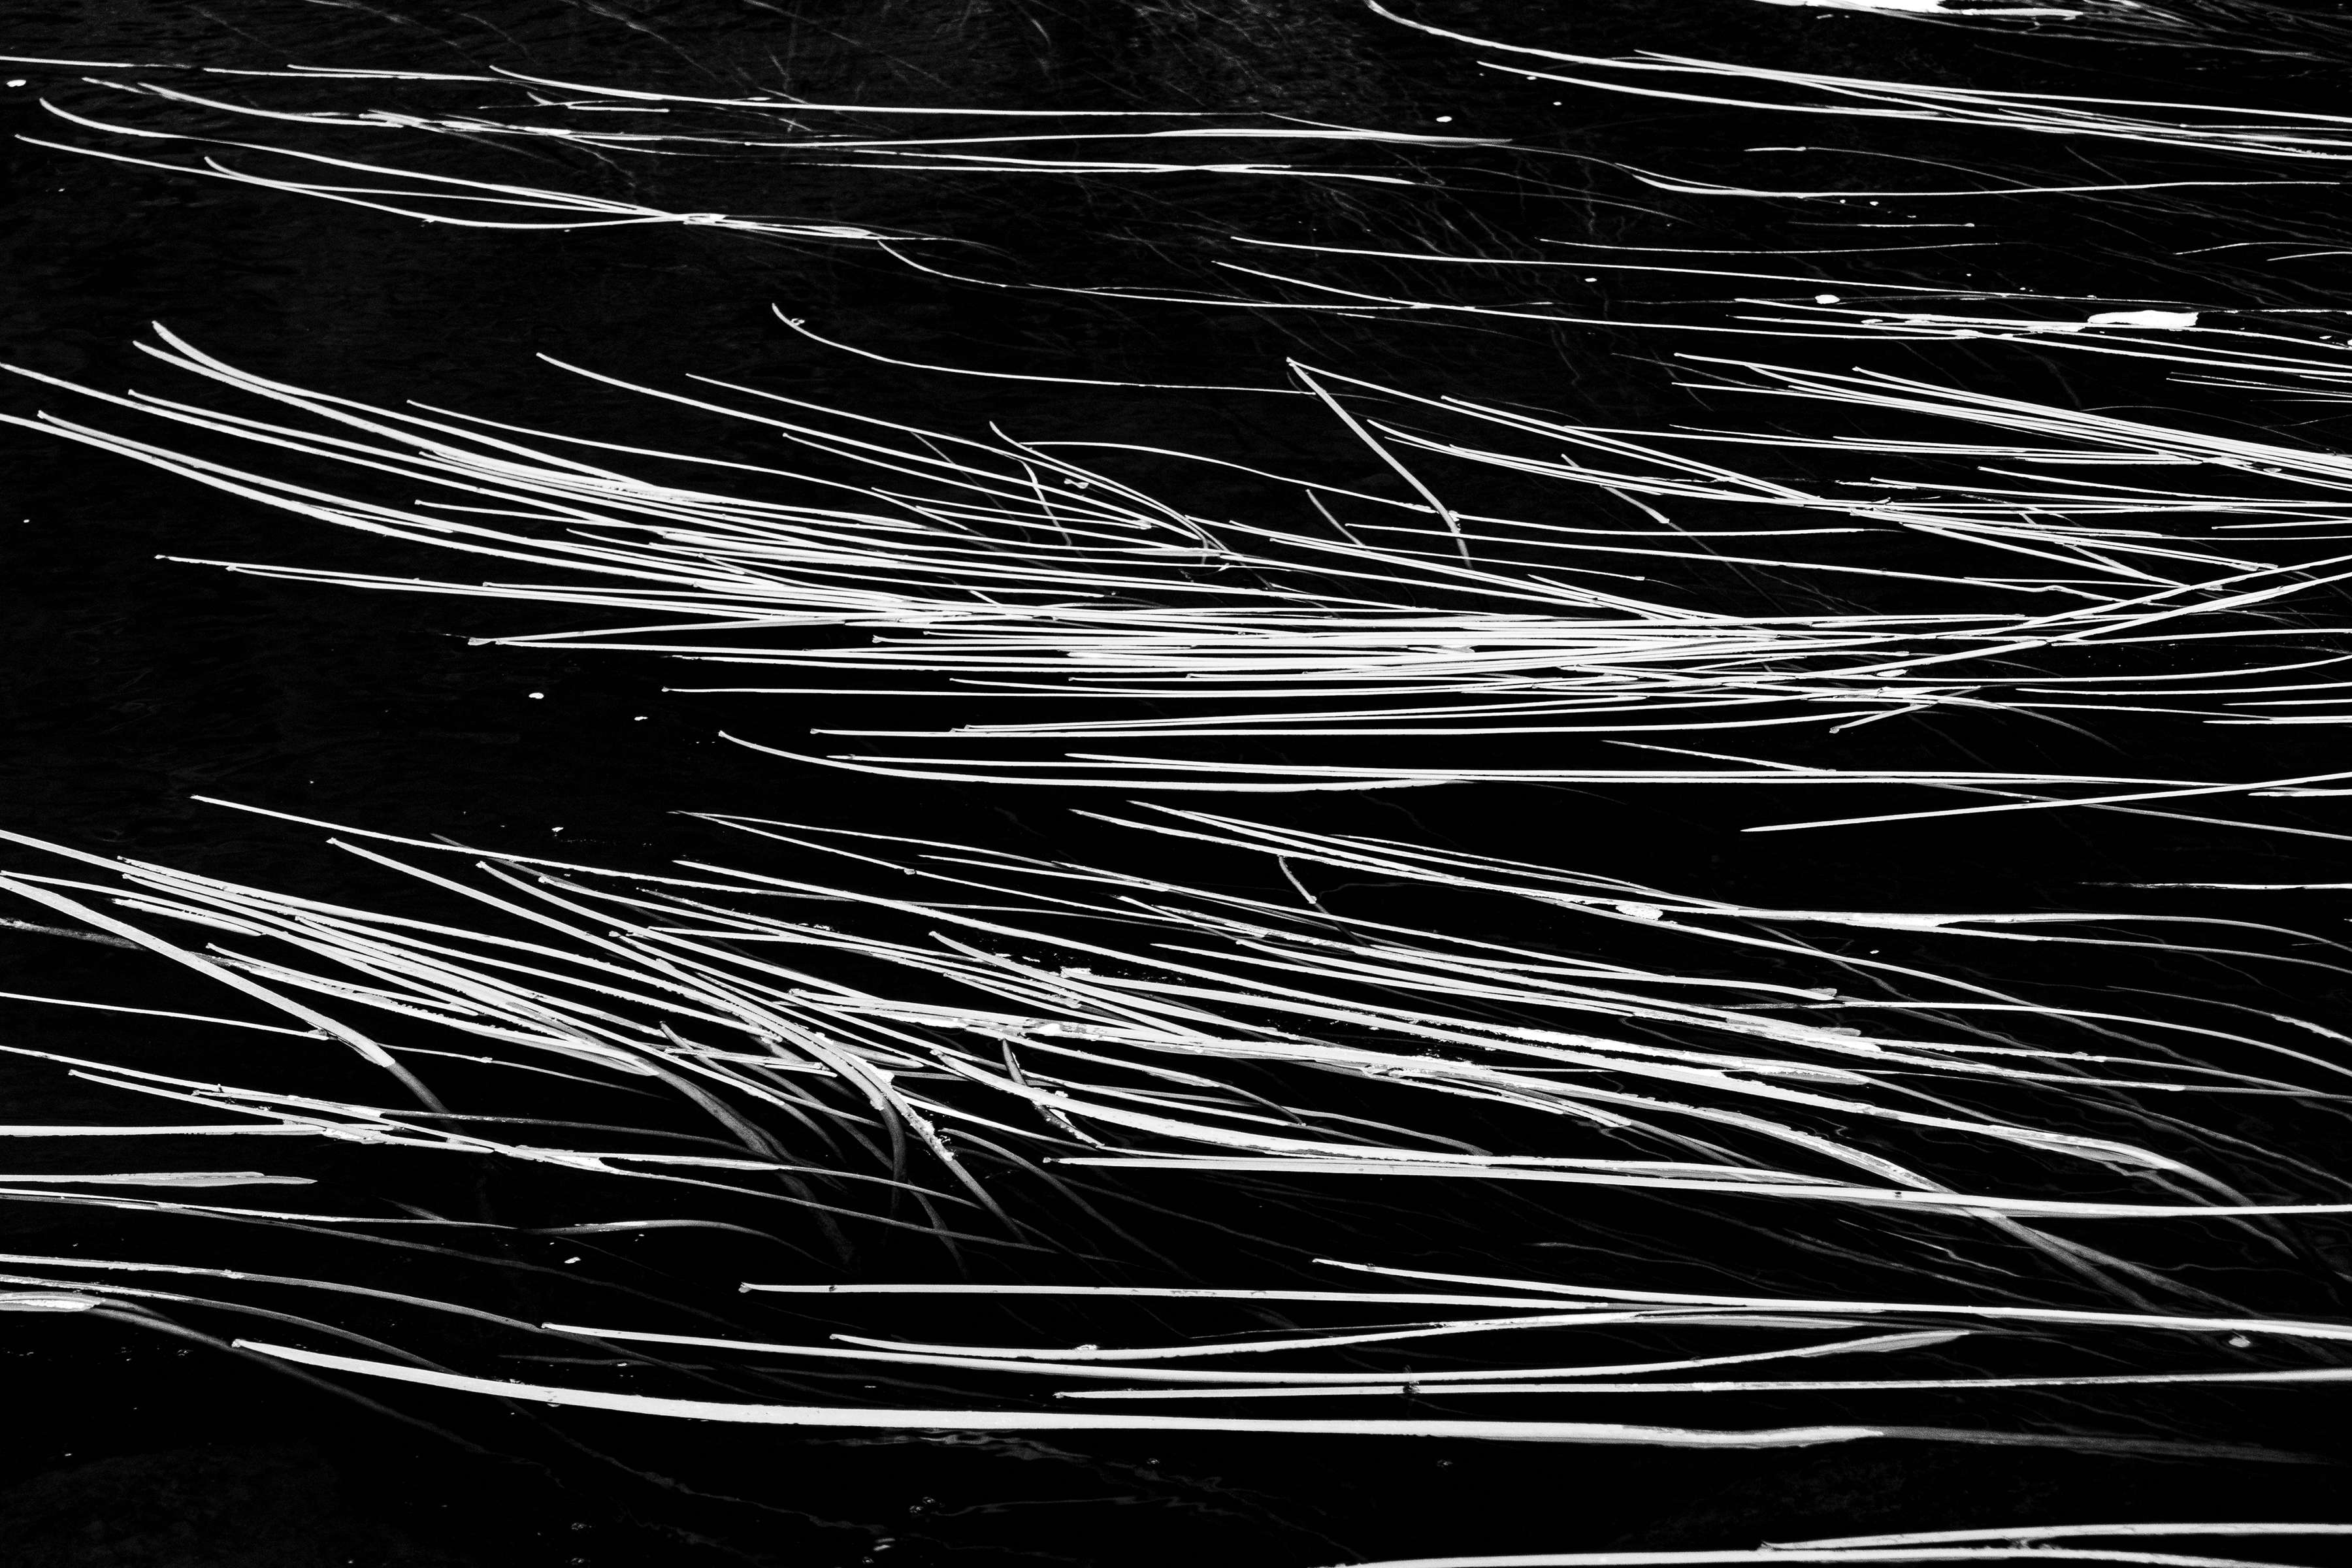 An abstract image of reeds in a river bed.